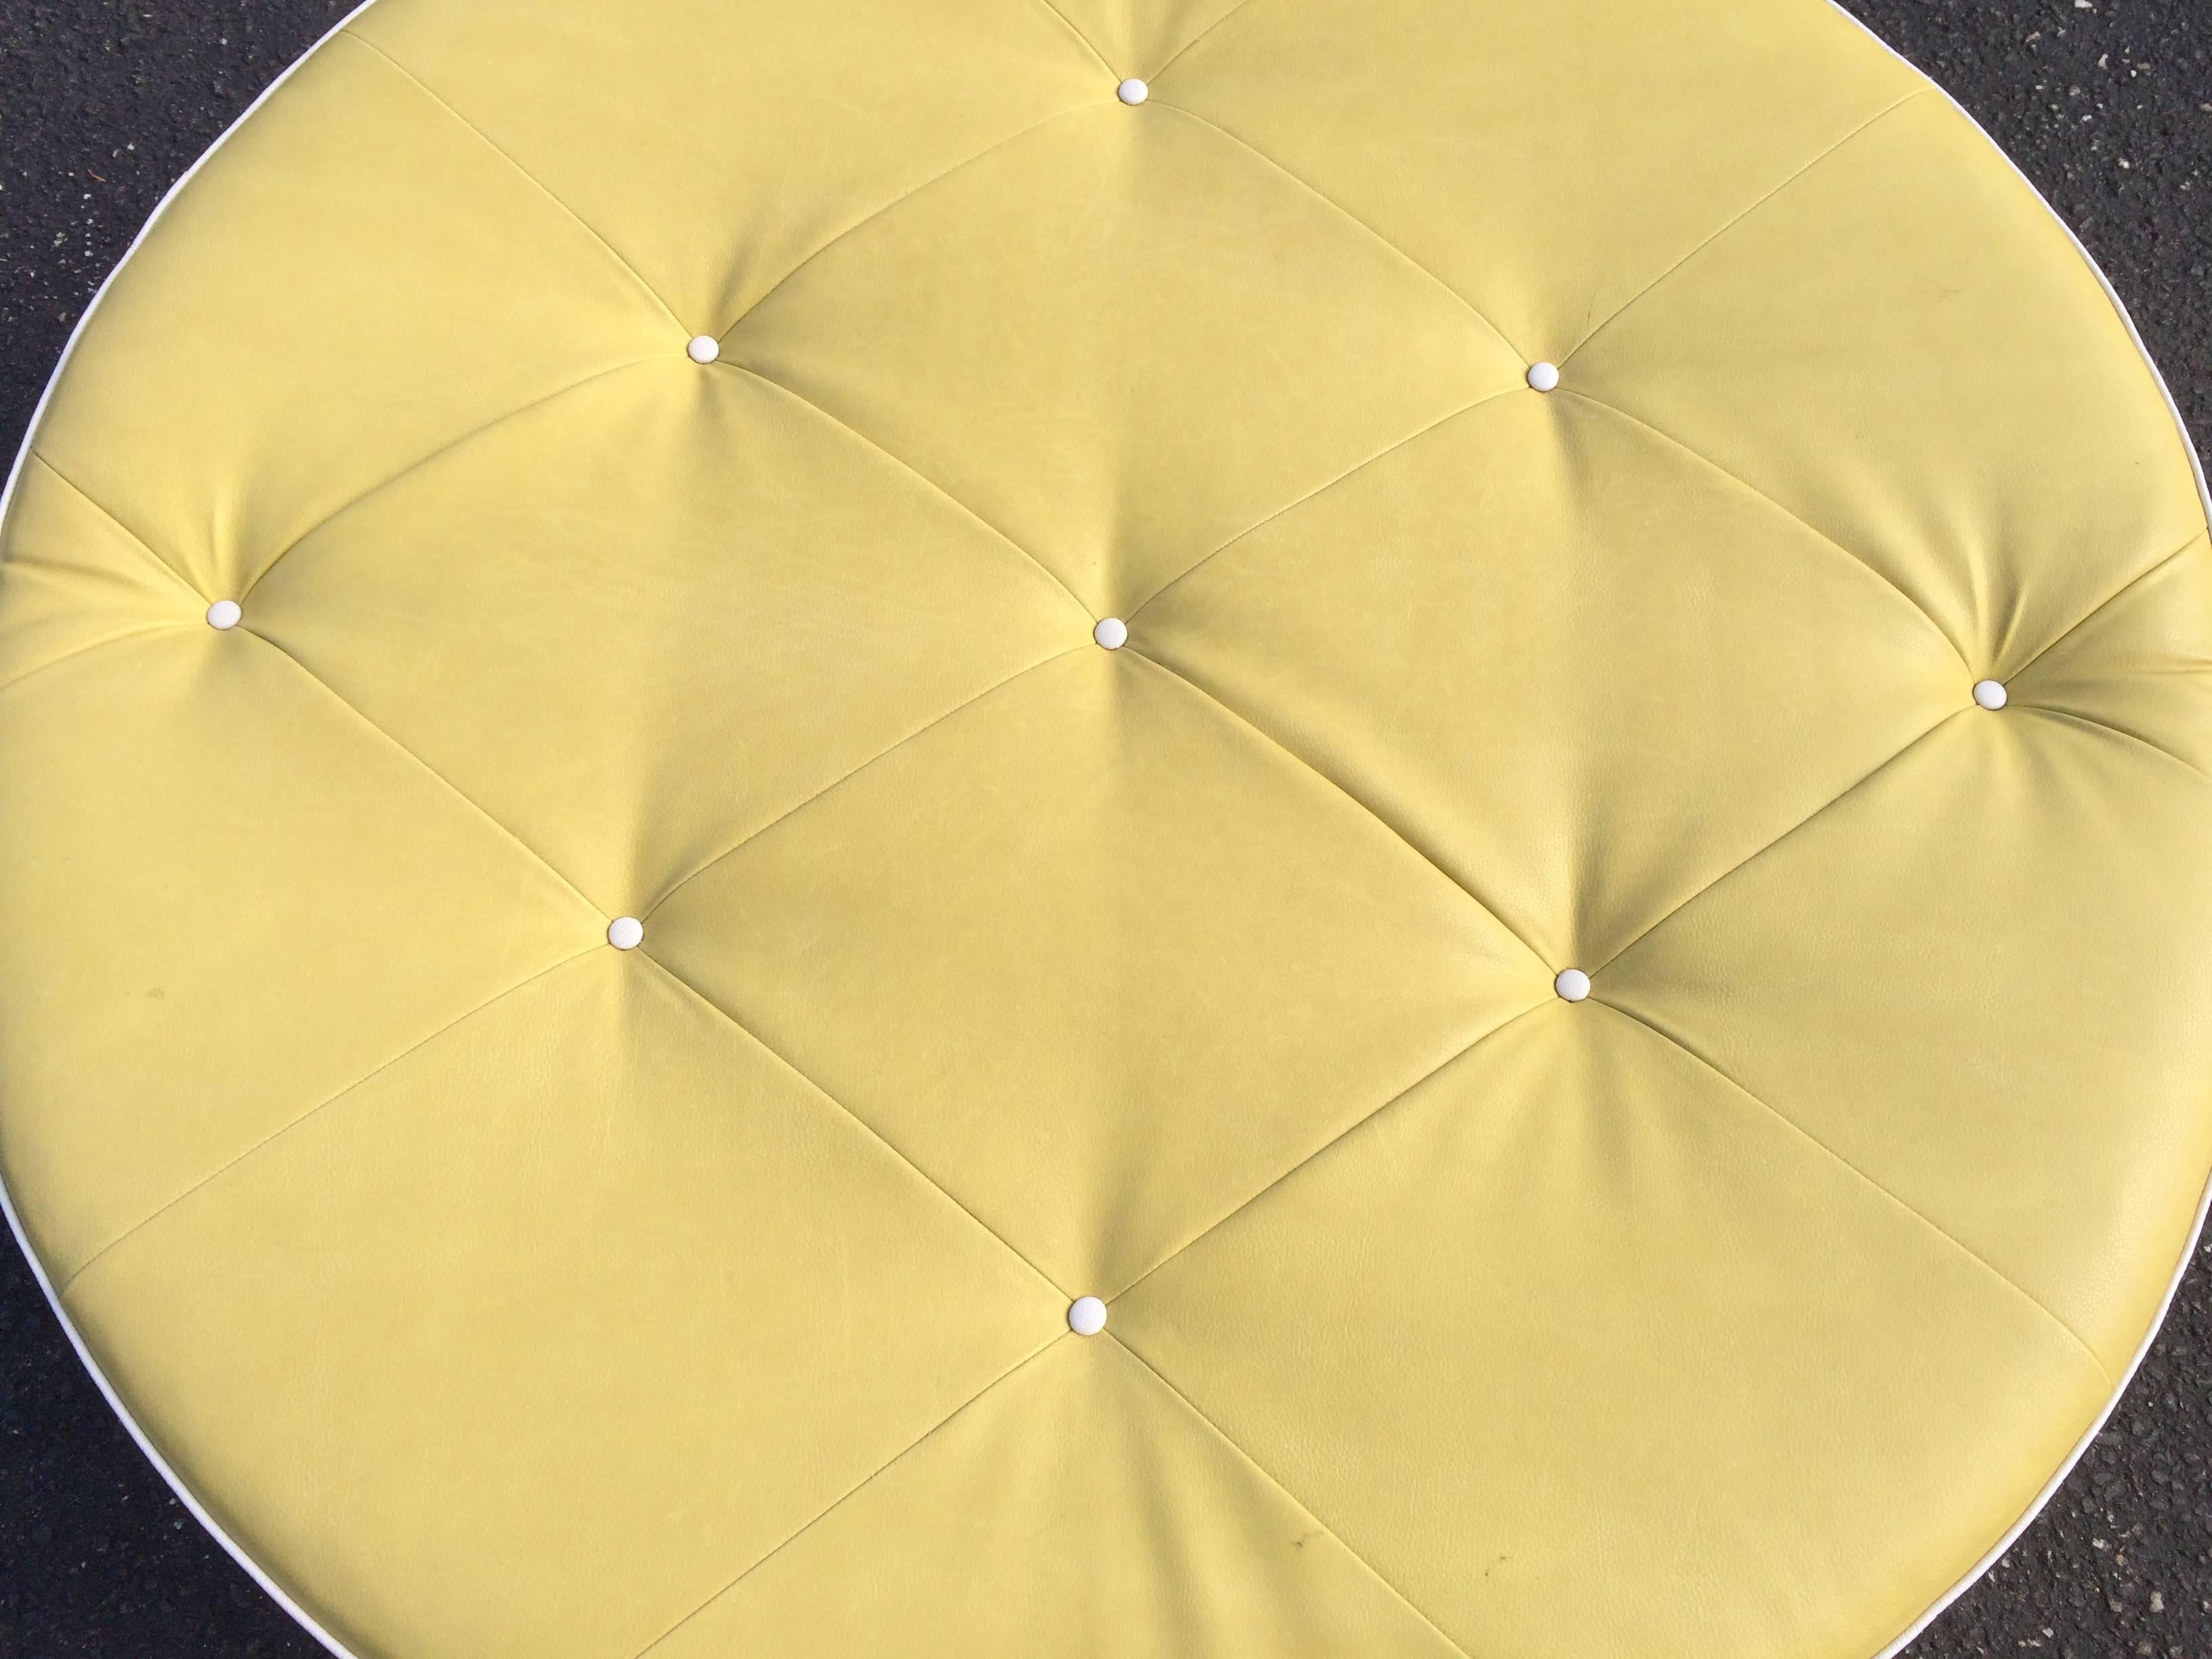 Hollywood Regency Tufted Round Yellow Ottoman on Brass Castors